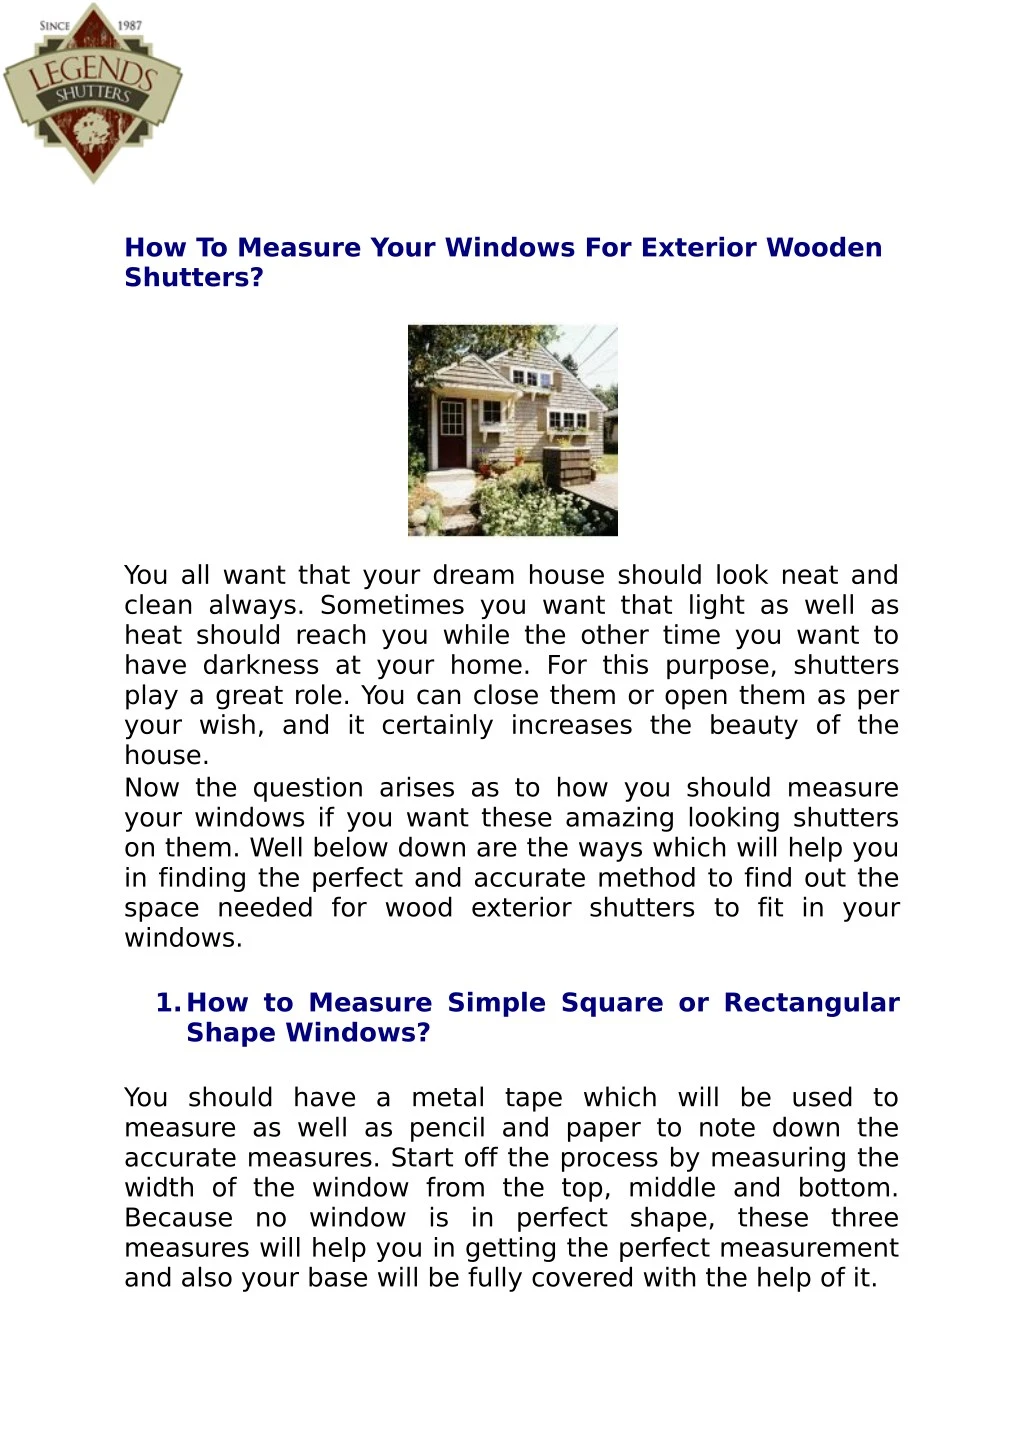 how to measure your windows for exterior wooden